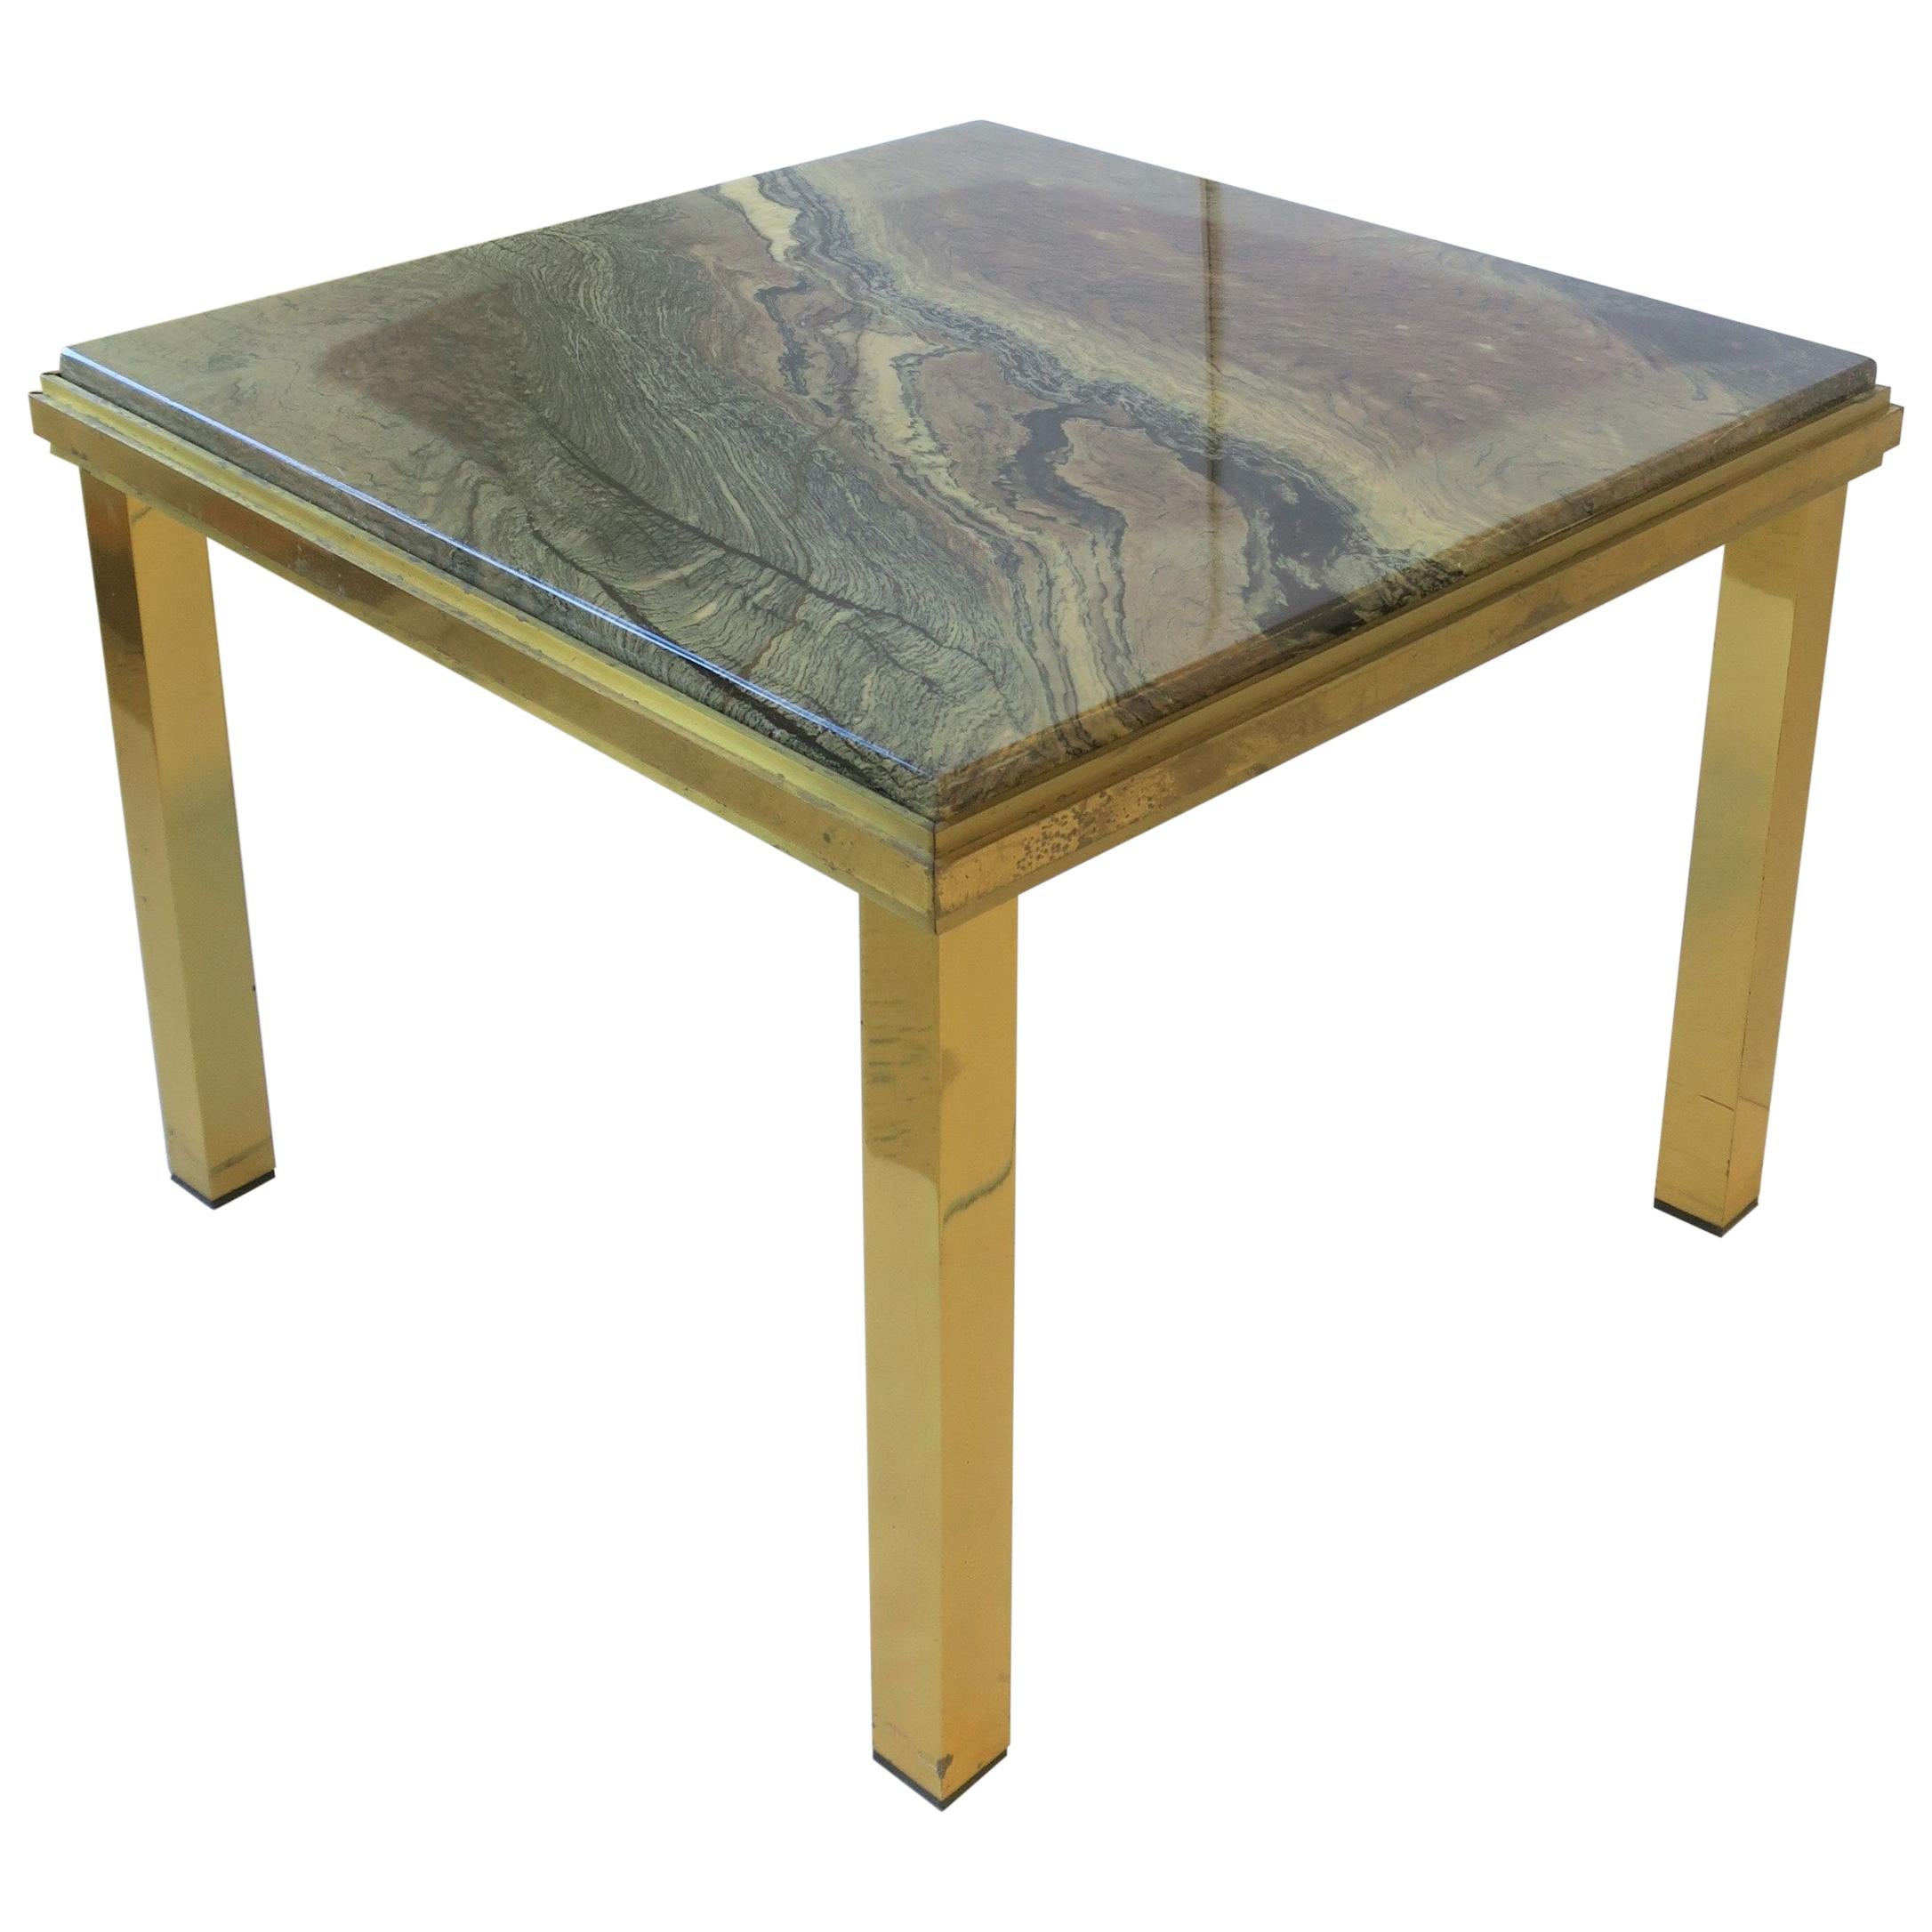 Italian Modern Brass and Marble End Table Willy Rizzo Style, circa 1970s